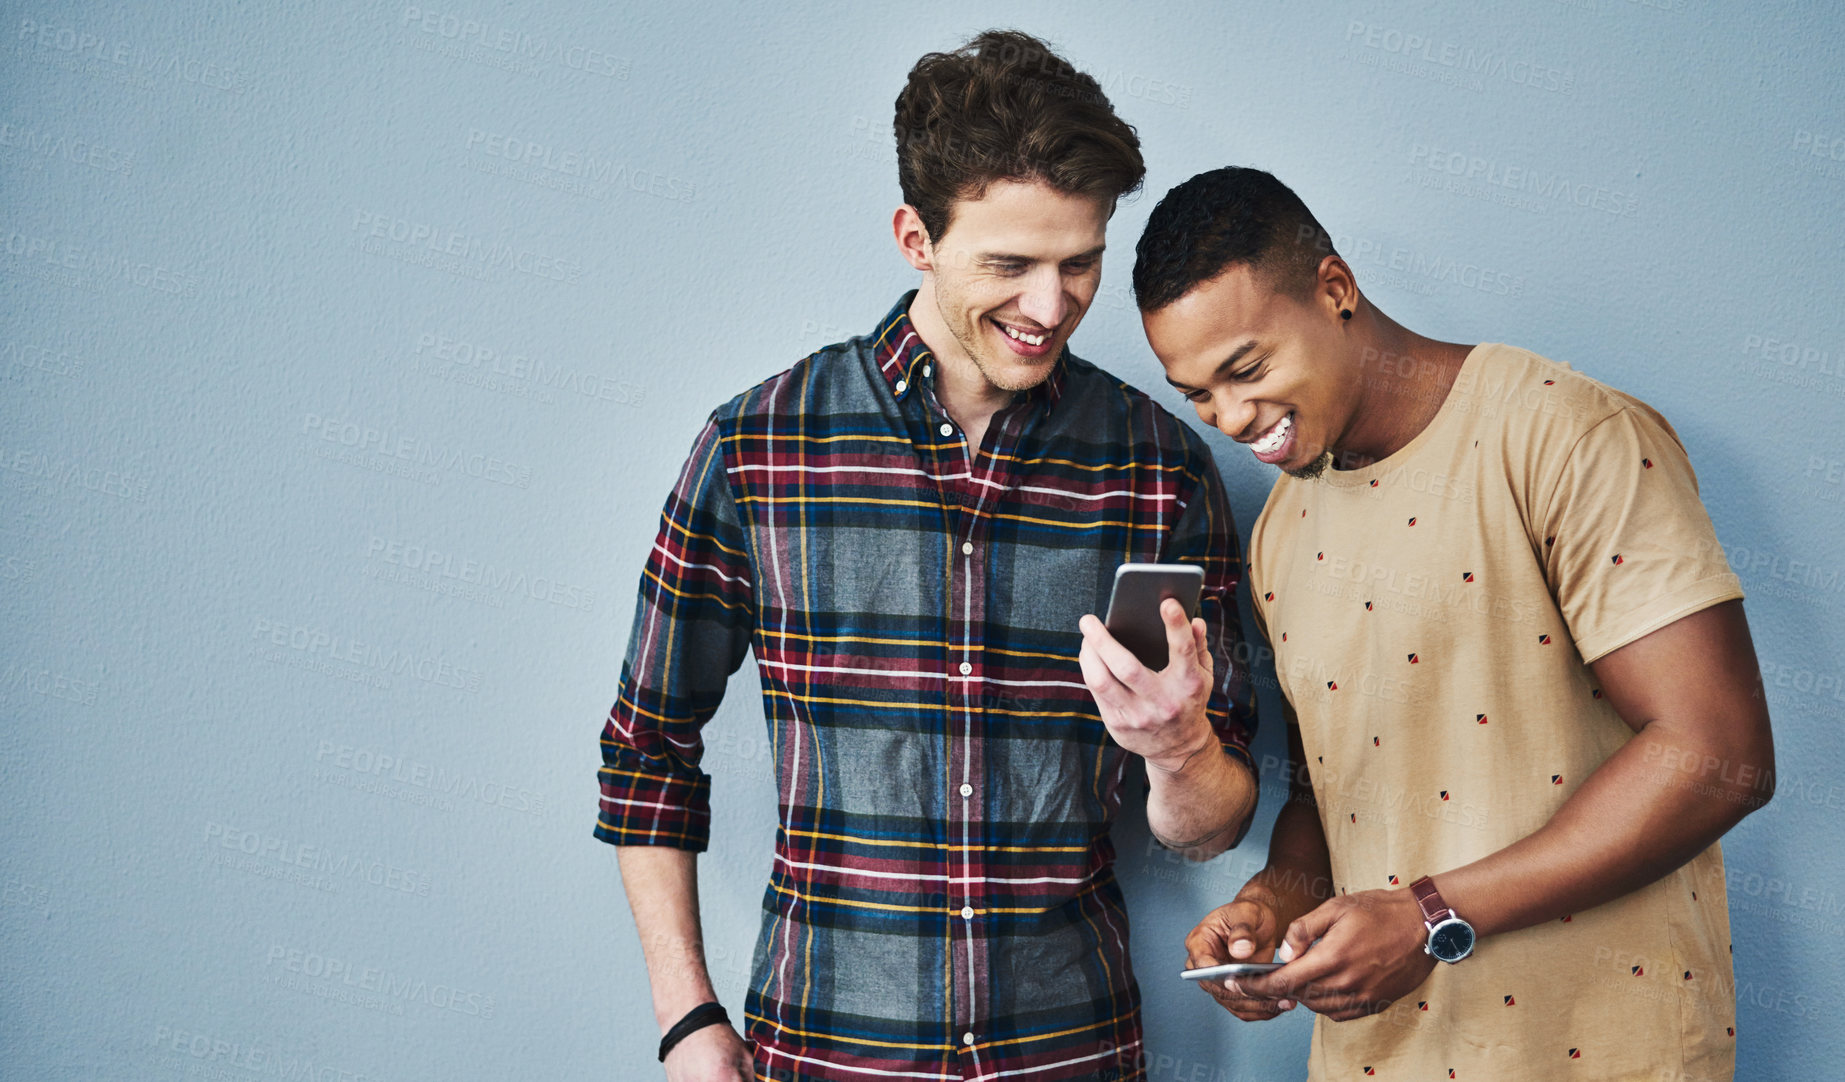 Buy stock photo Studio shot of two young men using a mobile phone together against a gray background